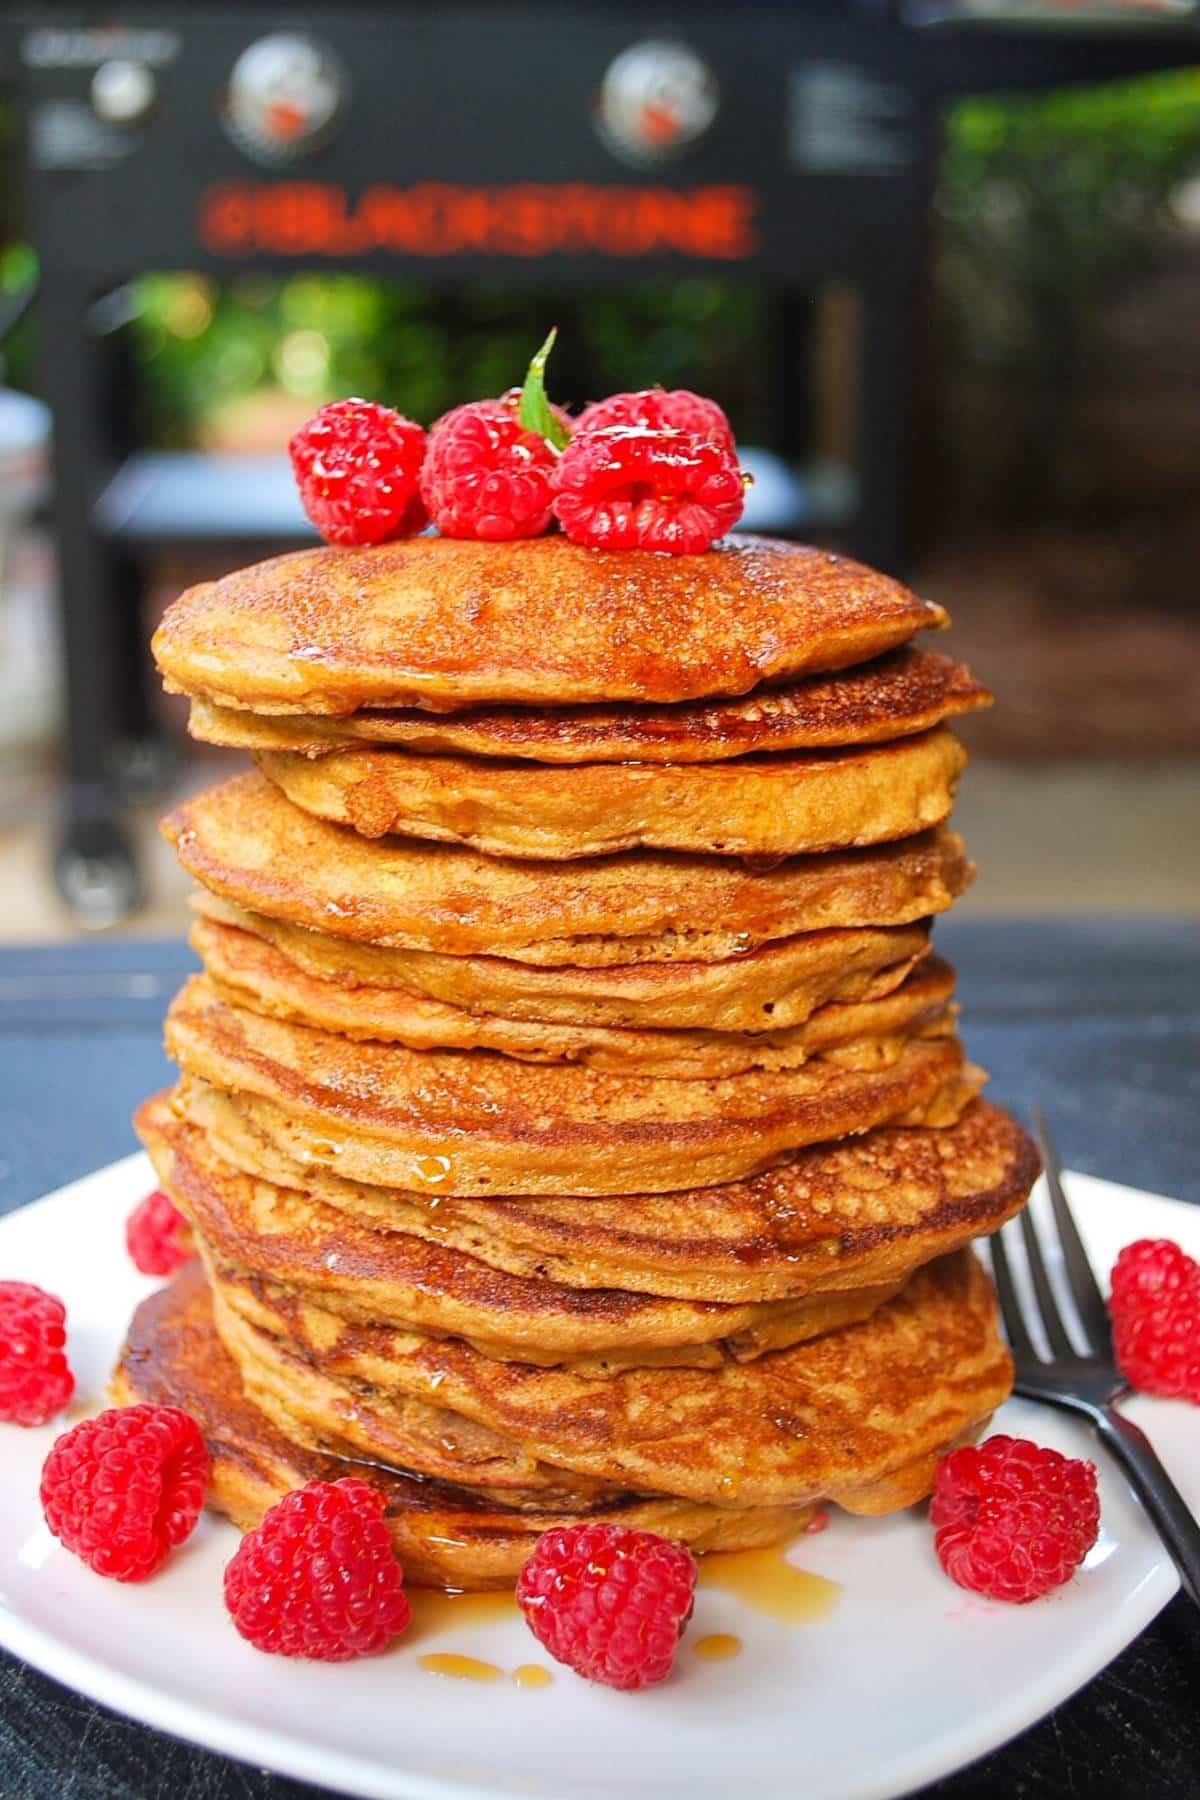 A stack of pancakes topped with raspberries.